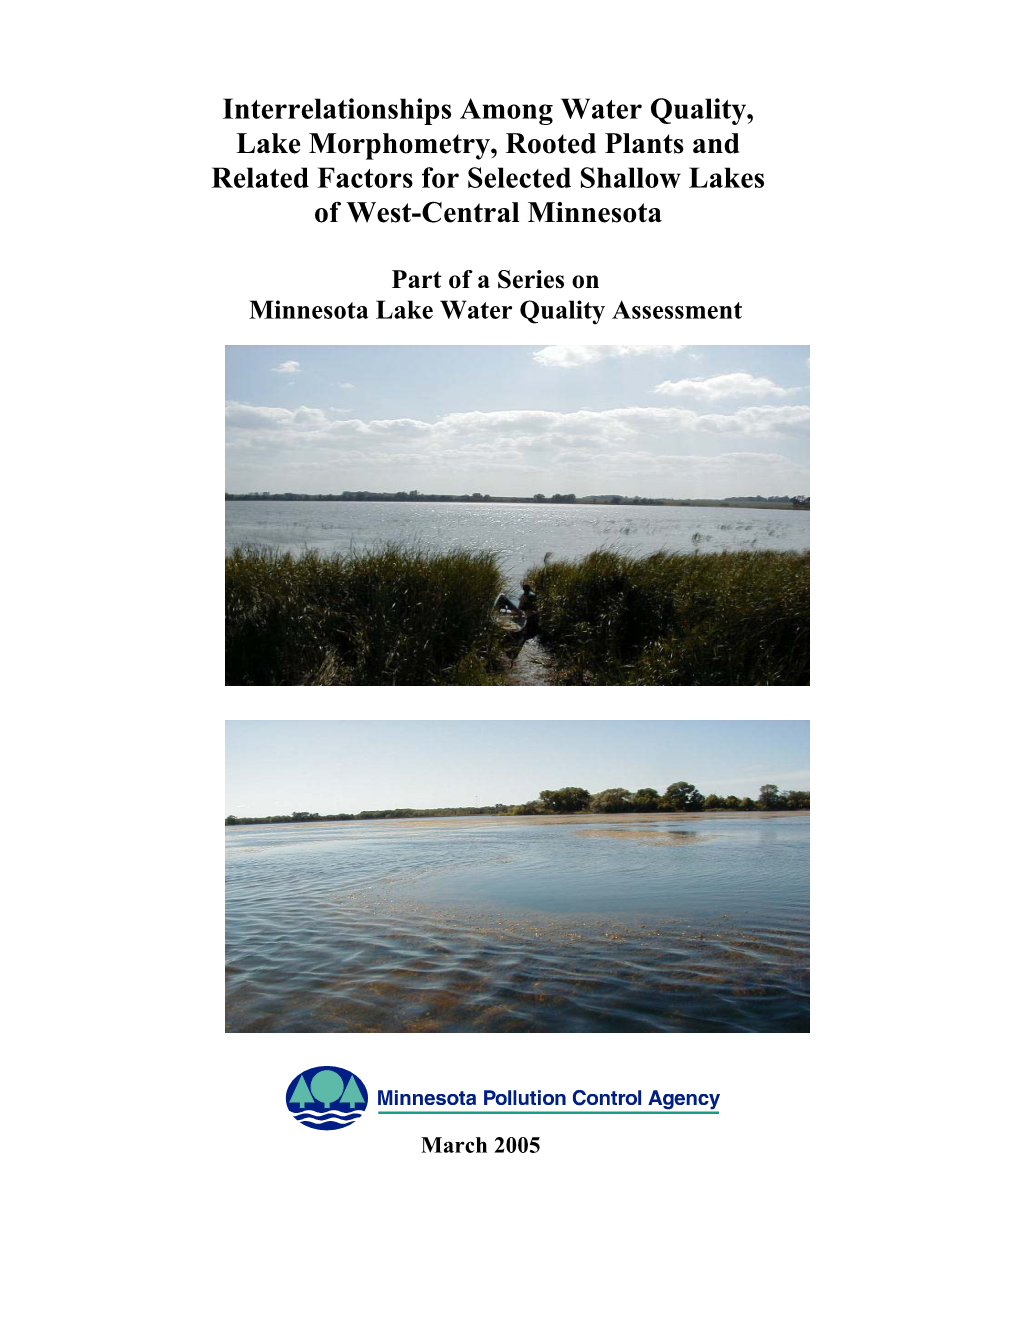 Interrelationships Among Water Quality, Lake Morphometry, Rooted Plants and Related Factors for Selected Shallow Lakes of West-Central Minnesota